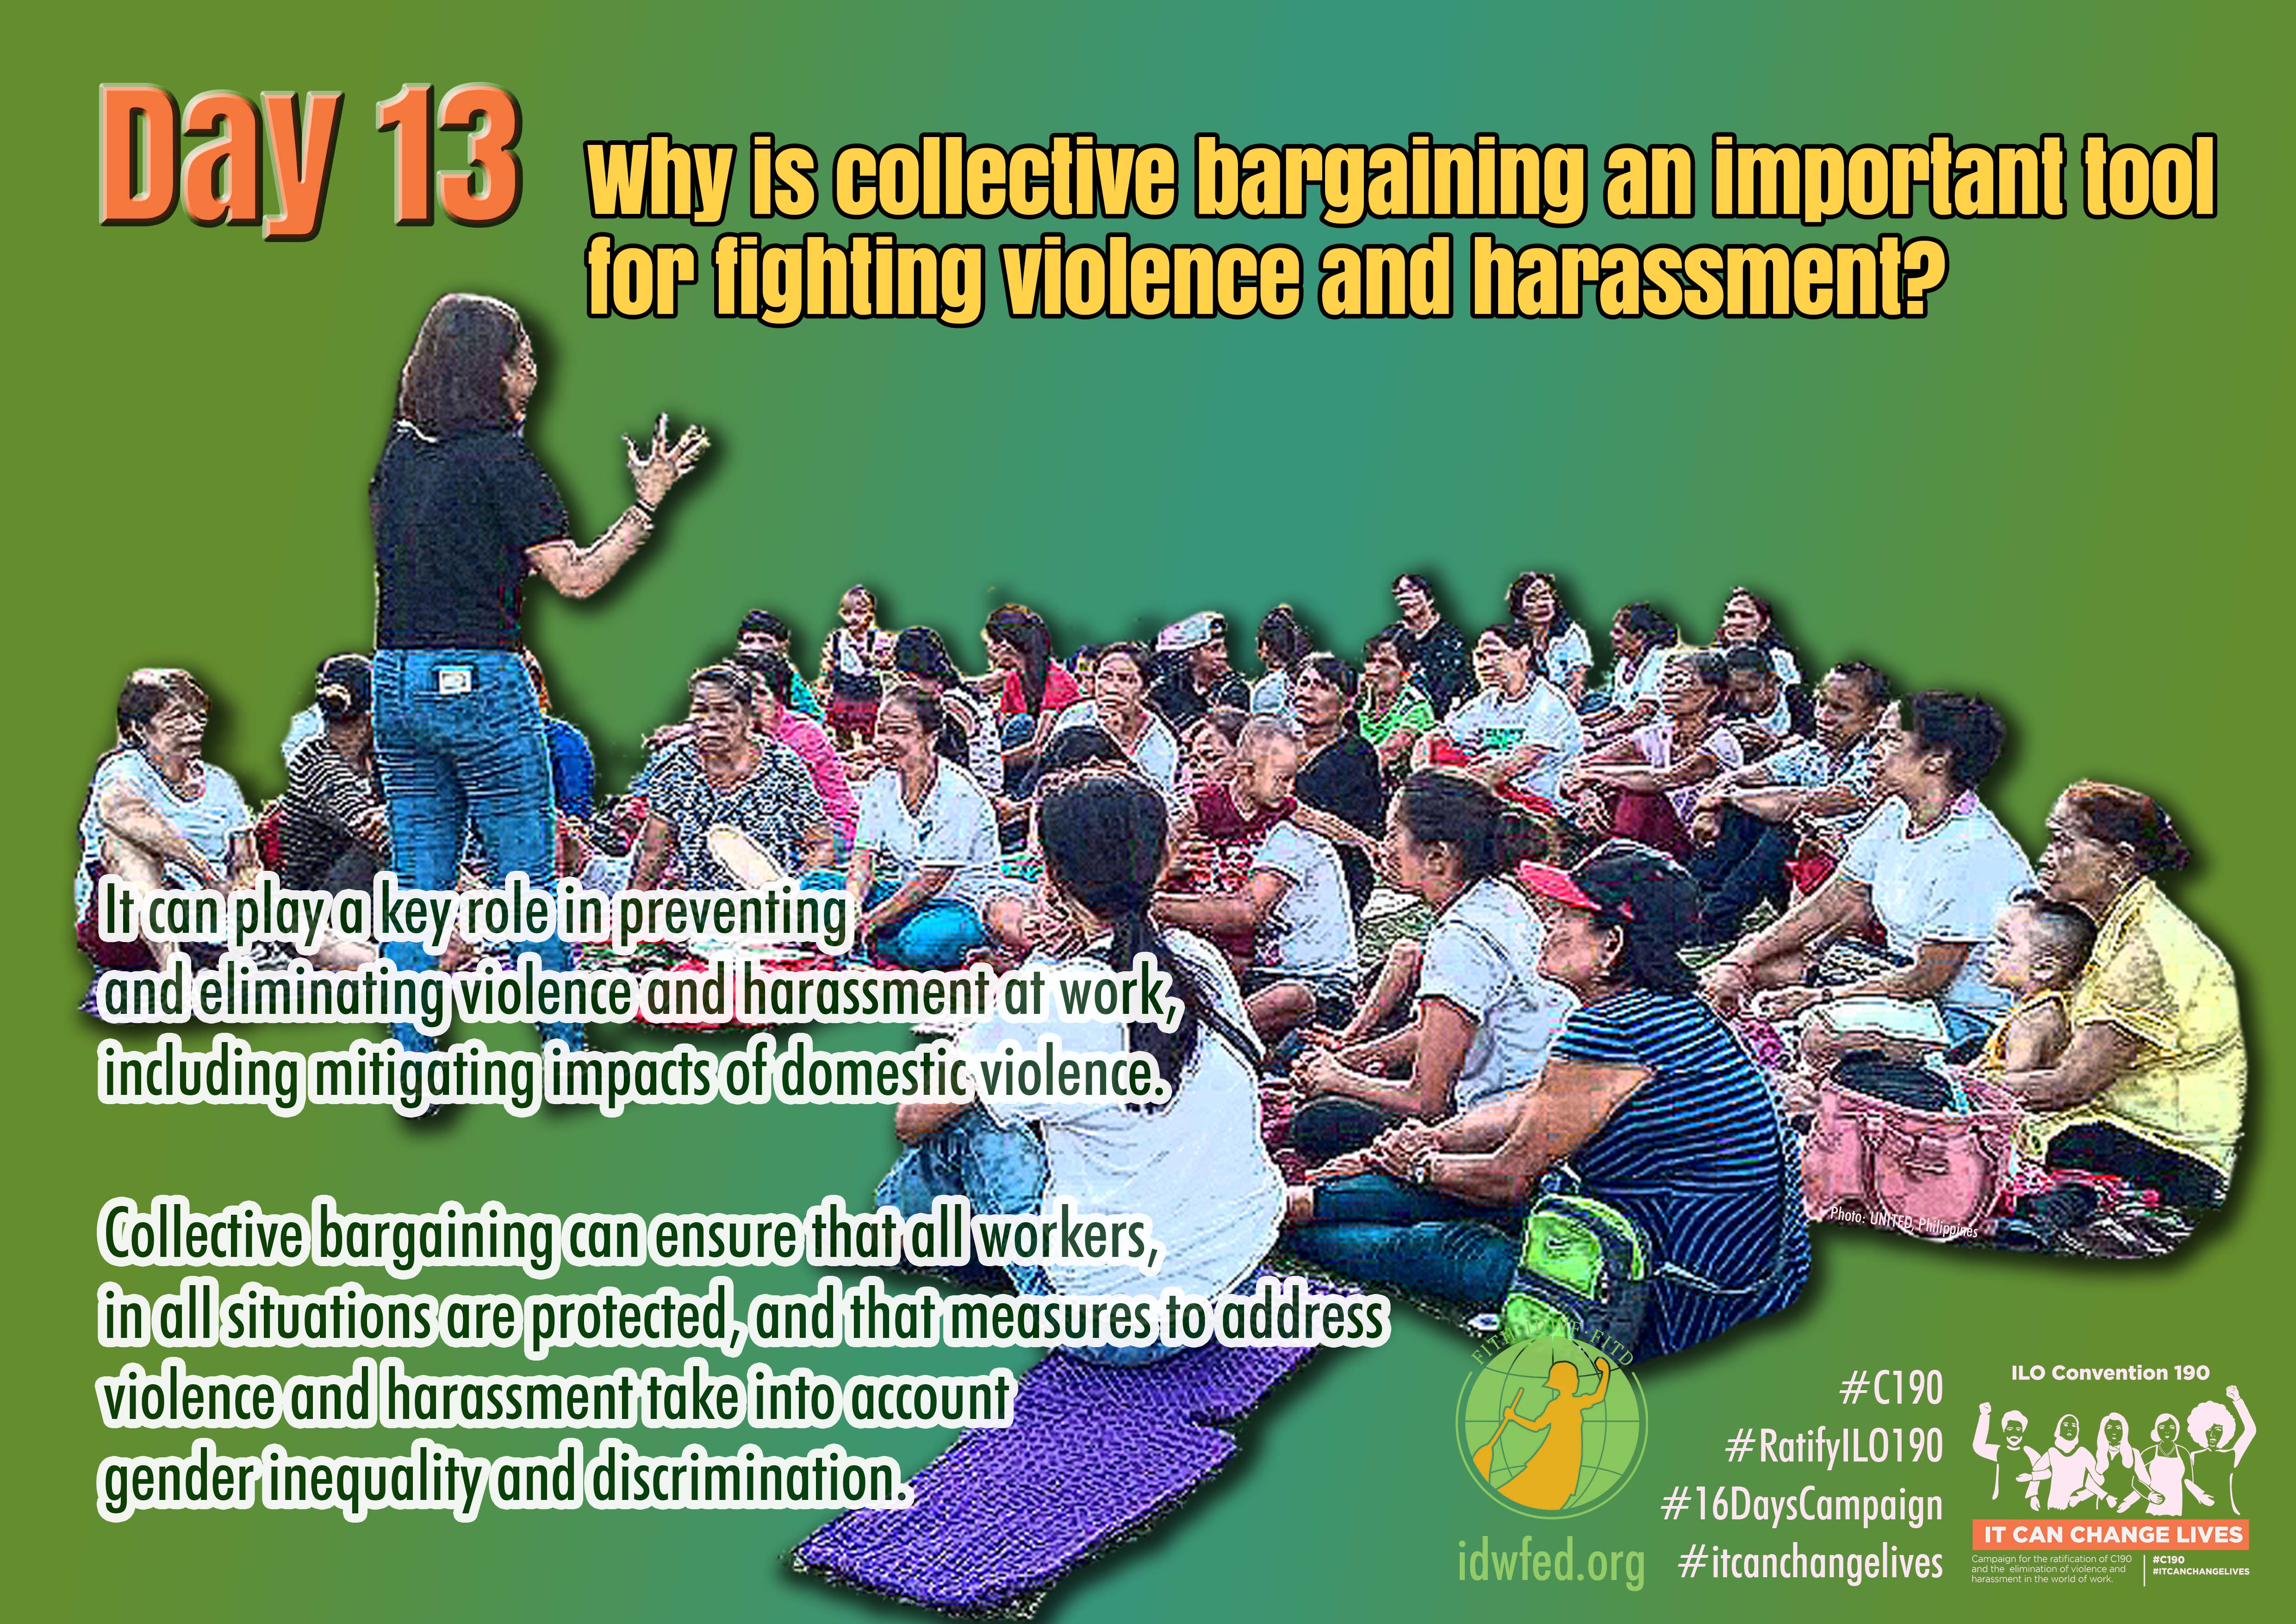 13. Why is collective bargaining an important tool for fighting violence and harassment?